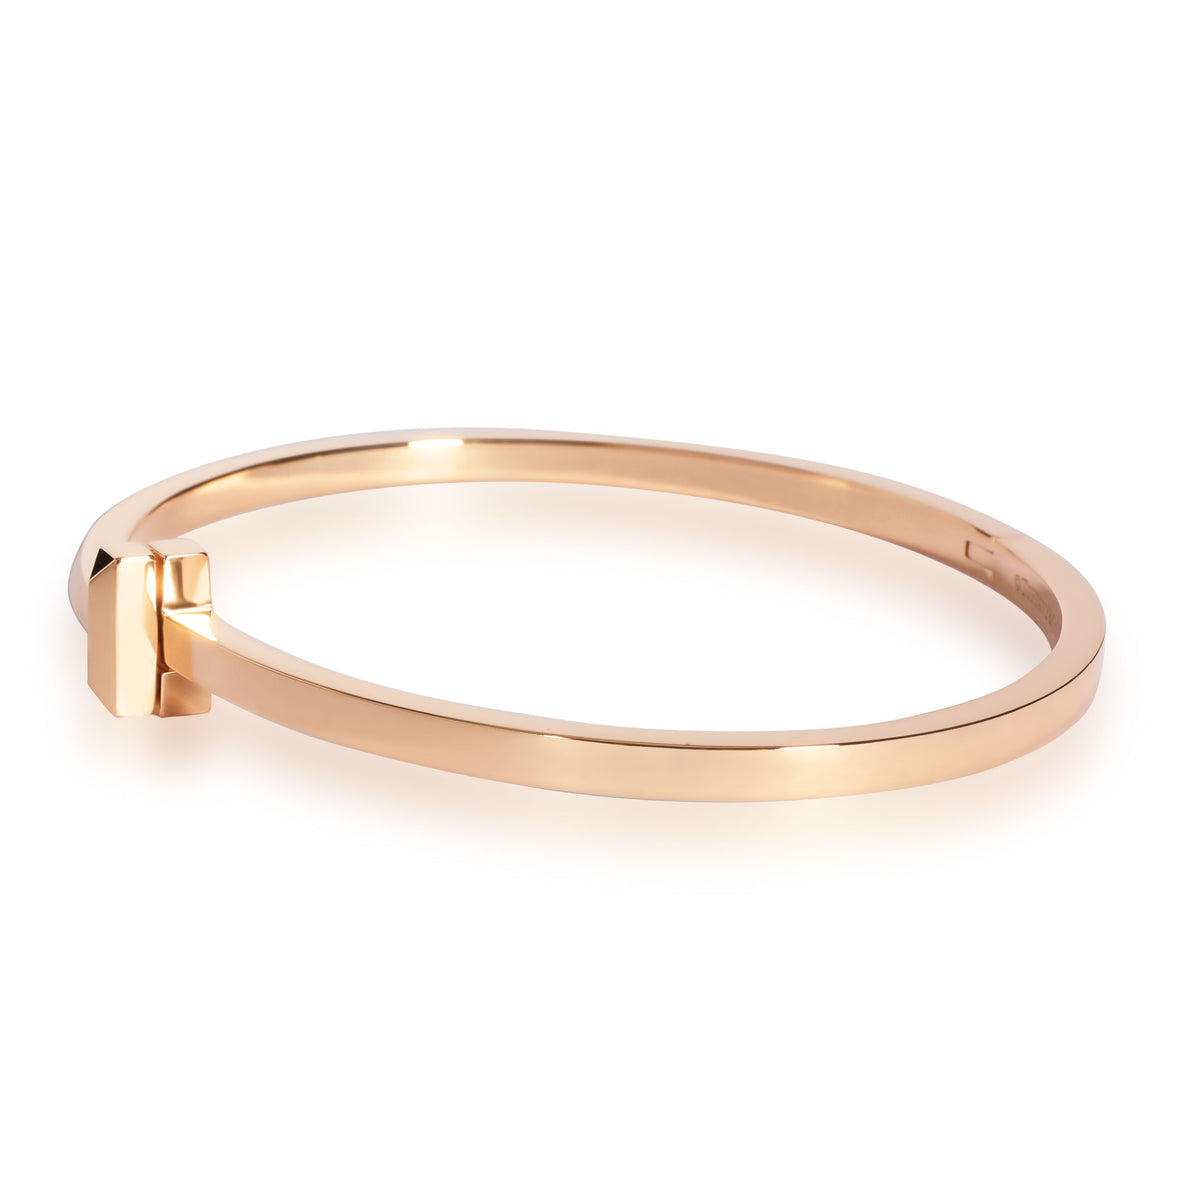 Tiffany & Co. T1 Hinged Bangle in 18KT Rose Gold